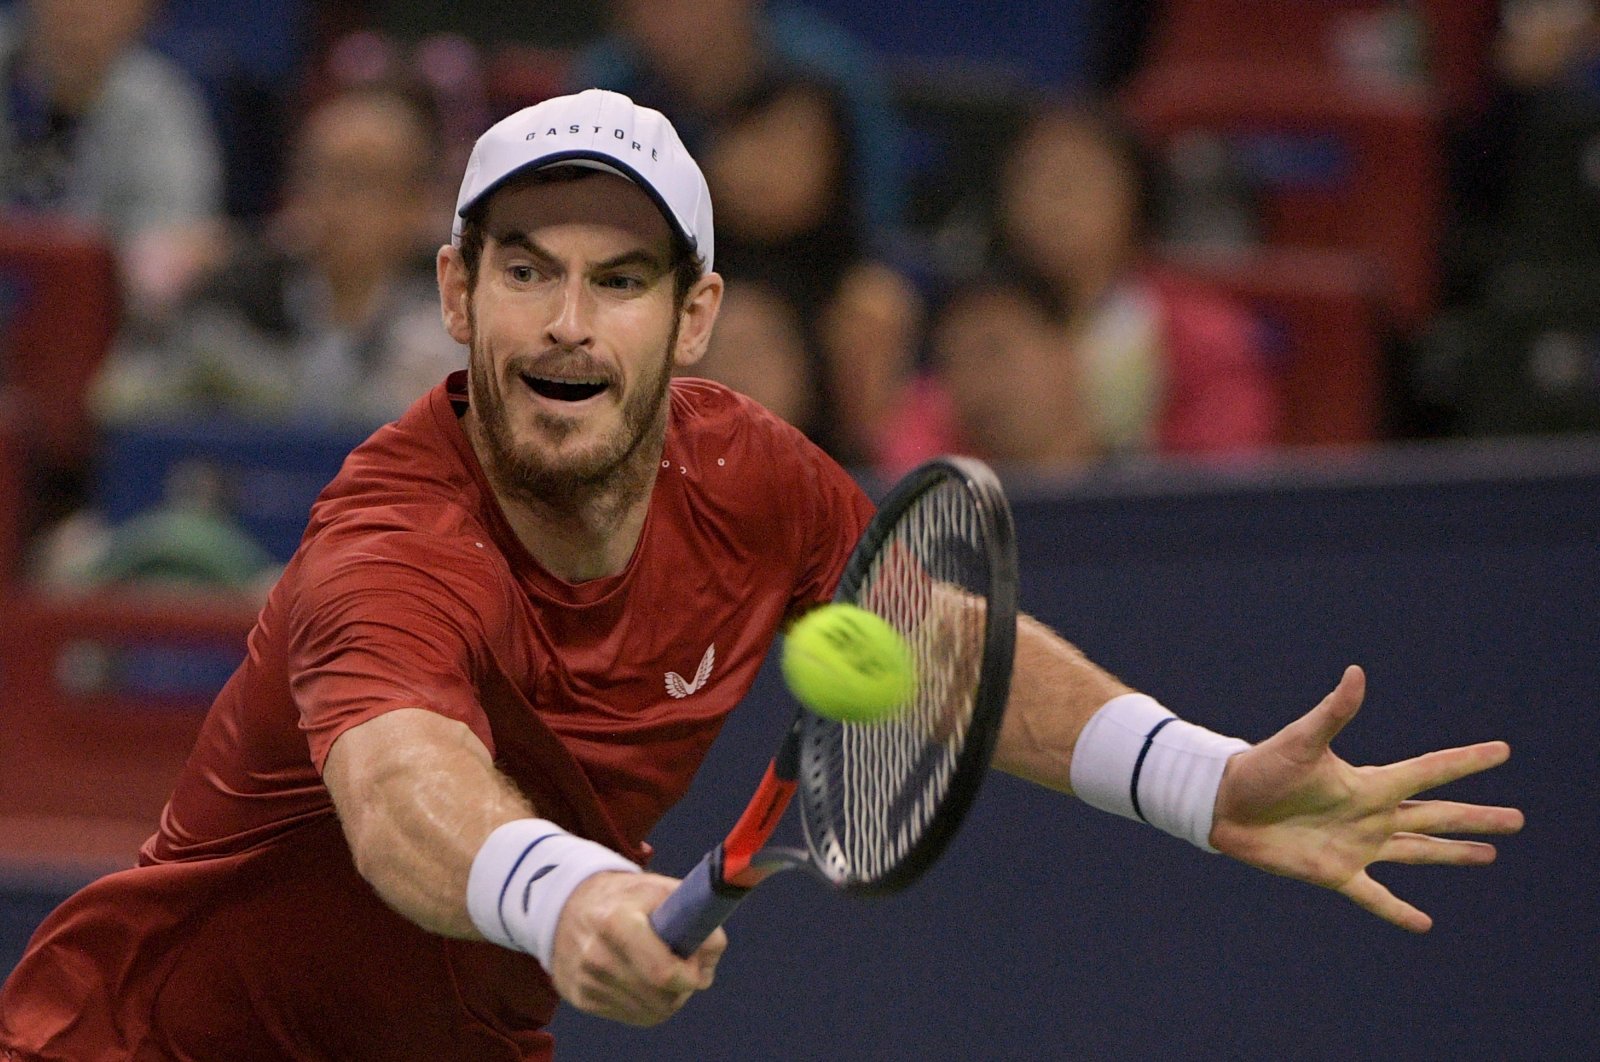 Andy Murray of Britain hits a return against Juan Ignacio Londero of Argentina during their first-round men's singles match at the Shanghai Masters tennis tournament in Shanghai, Oct. 7, 2019. (AFP Photo)